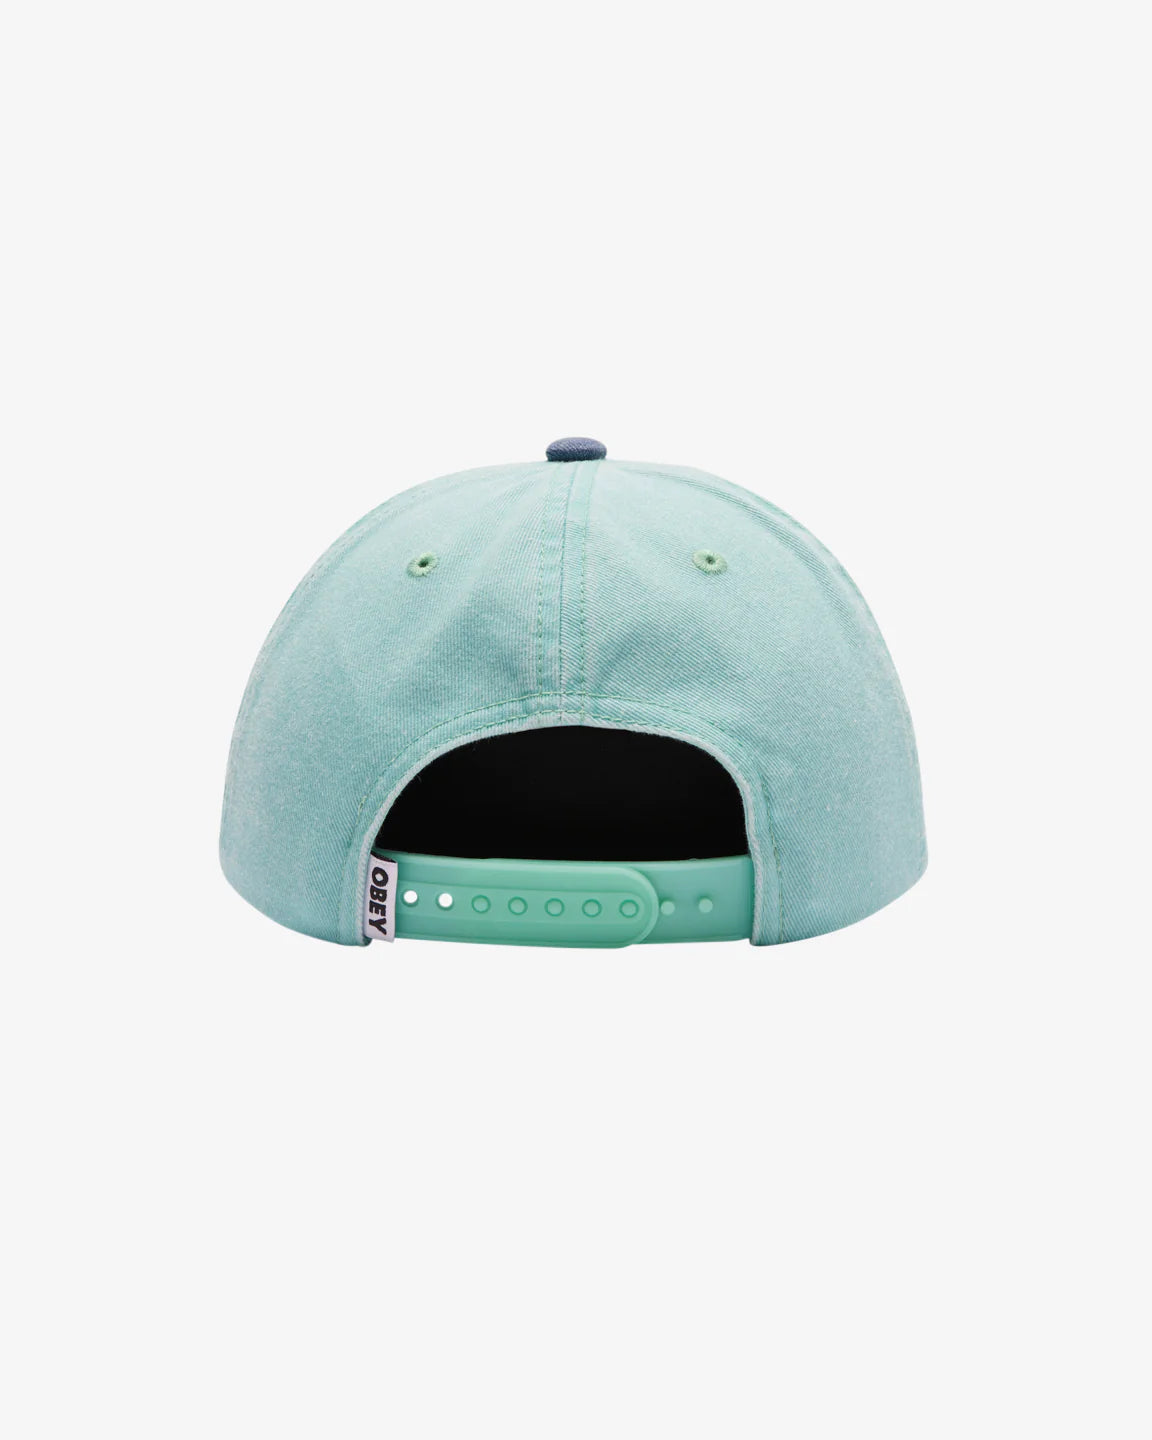 OBEY Pigment Fruits 6 Panel Hat Sea Spray Multi Men's Hats Obey 